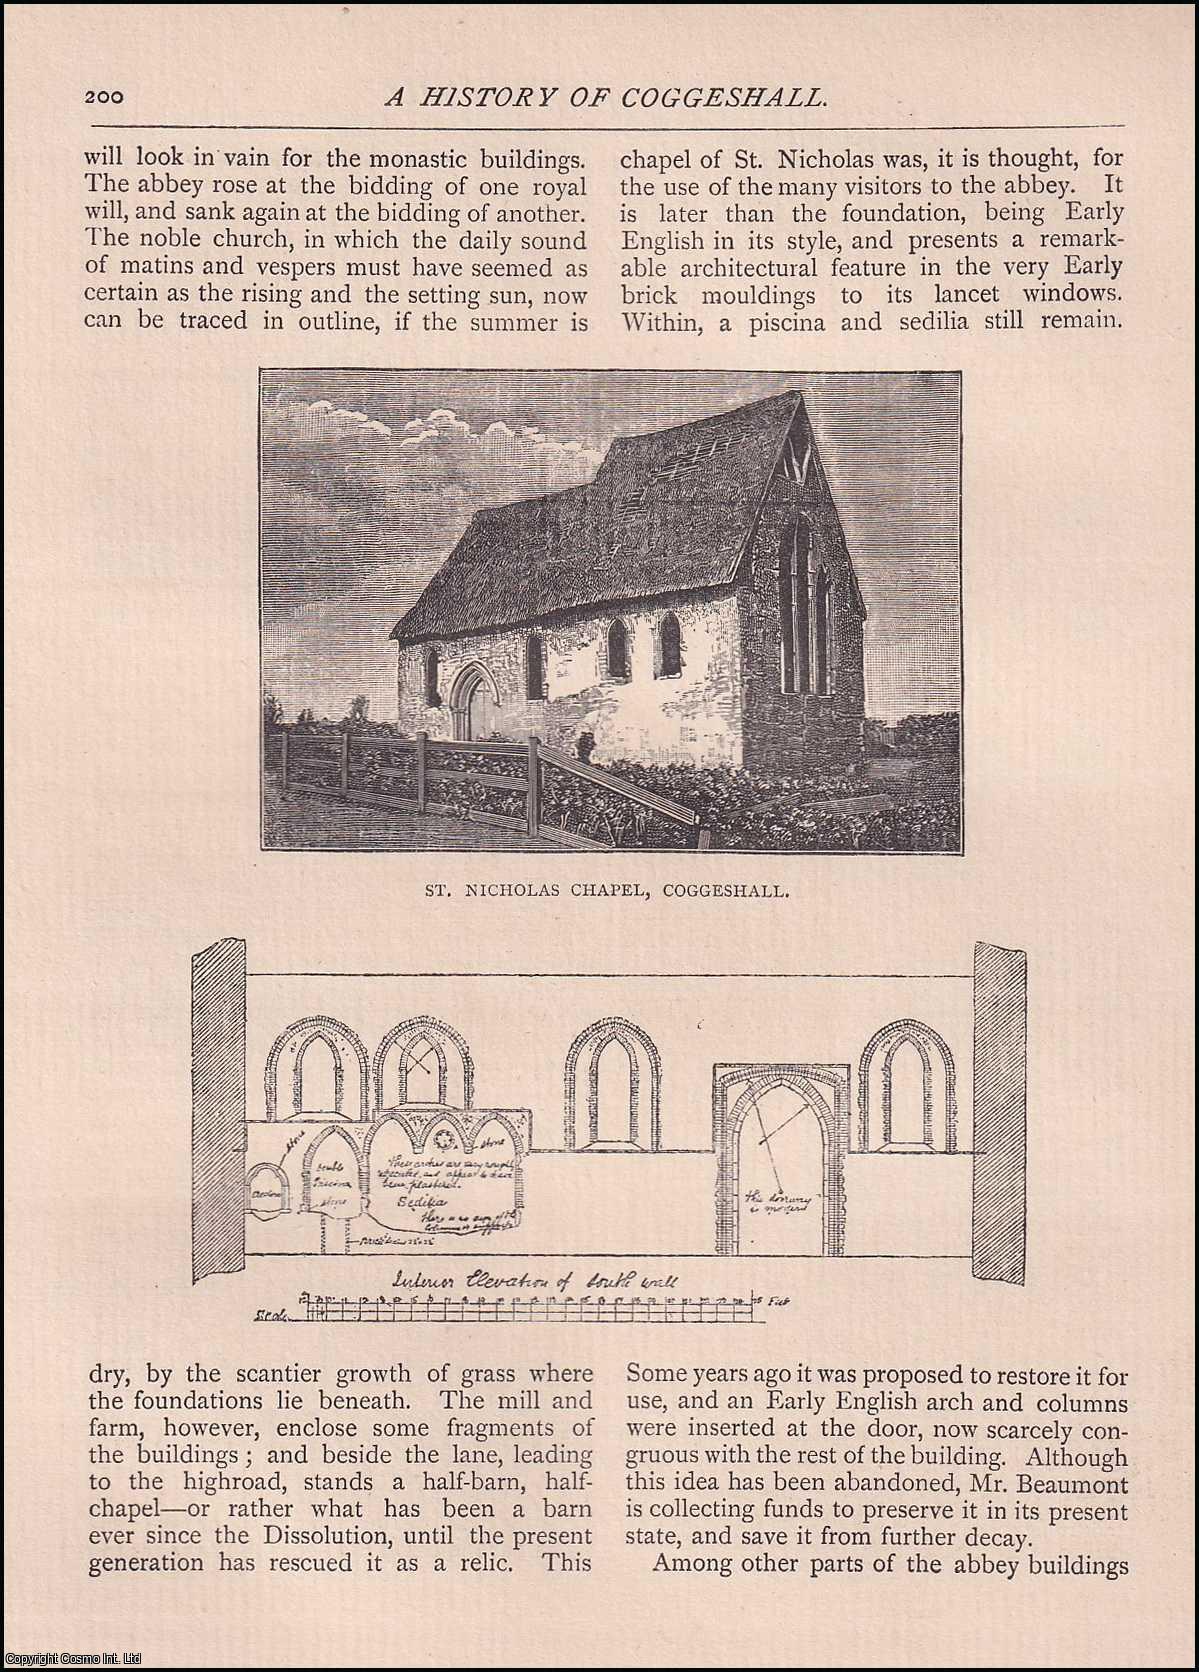 W. R. G. - A History of Coggeshall. An original article from The Antiquary Magazine, 1890.